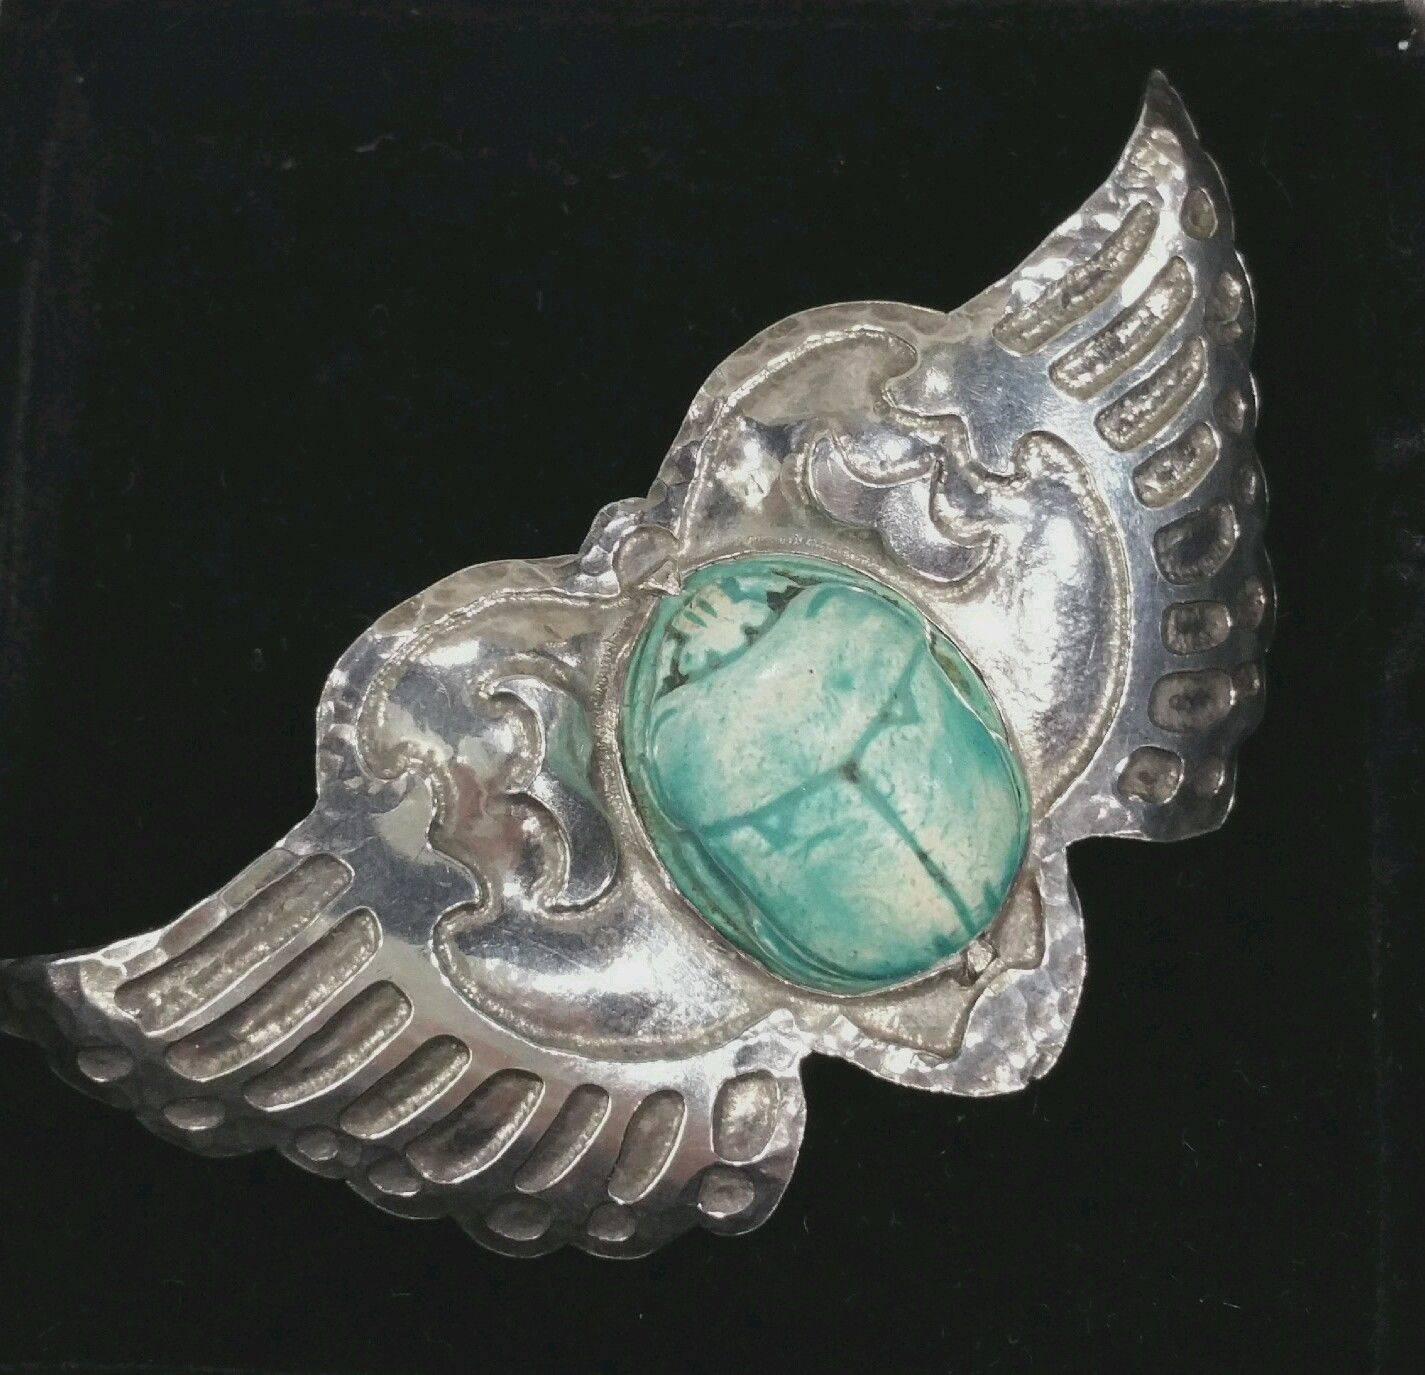 Being offered is an exceedingly rare sterling silver pin by Marshall Field of Chicago, Illinois. Incredible pin comprising a handwrought winged design; at the center, an intricately carved scarab. Dimensions : 3 1/4 inches x 1 3/4 inches. Marked as